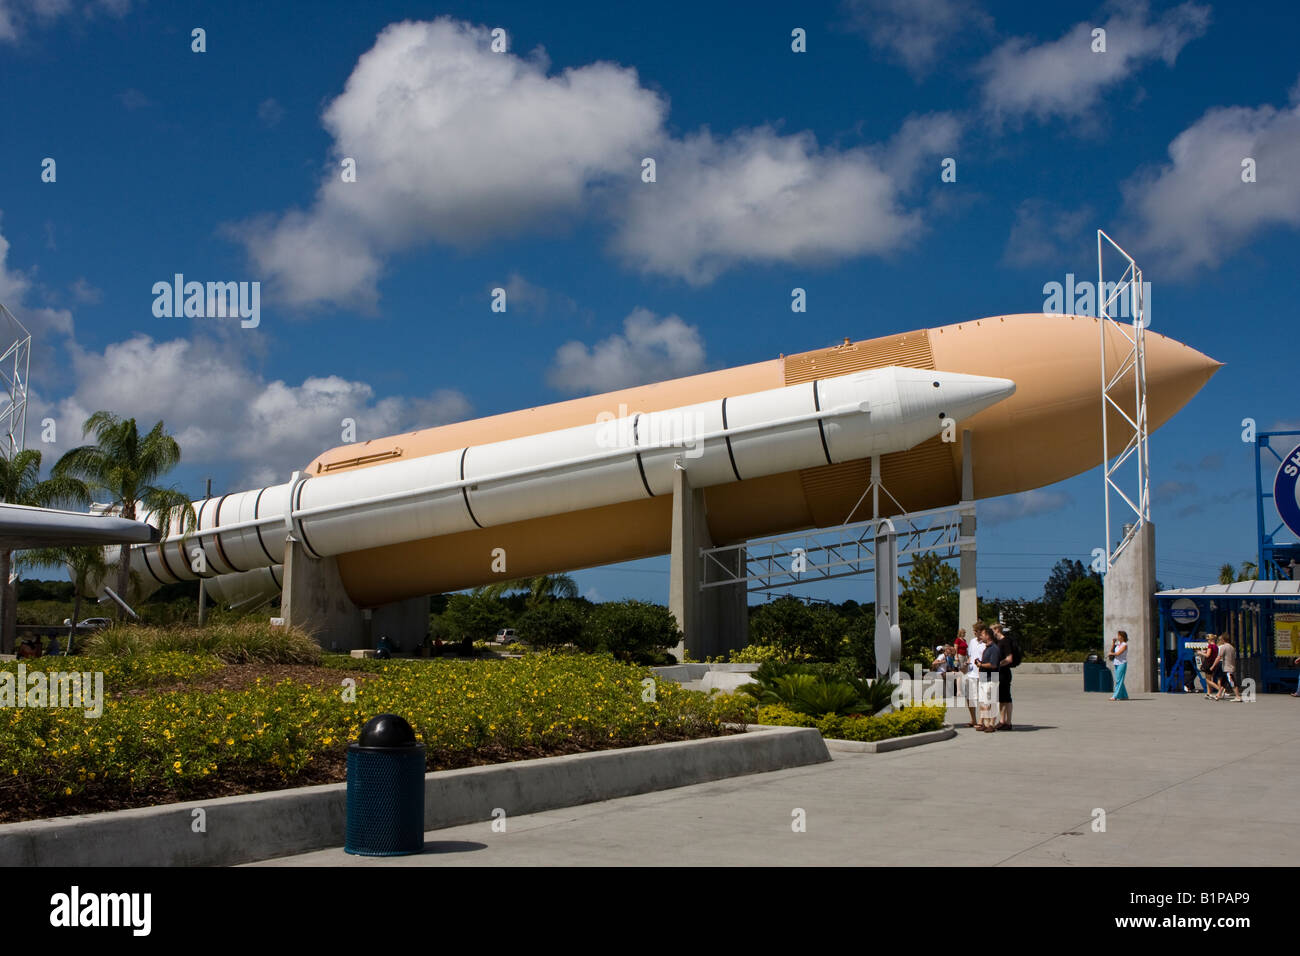 External Fuel Tank and Solid Rocket Boosters Display at the John F Kennedy Space Center in Cape Canaveral Florida Stock Photo